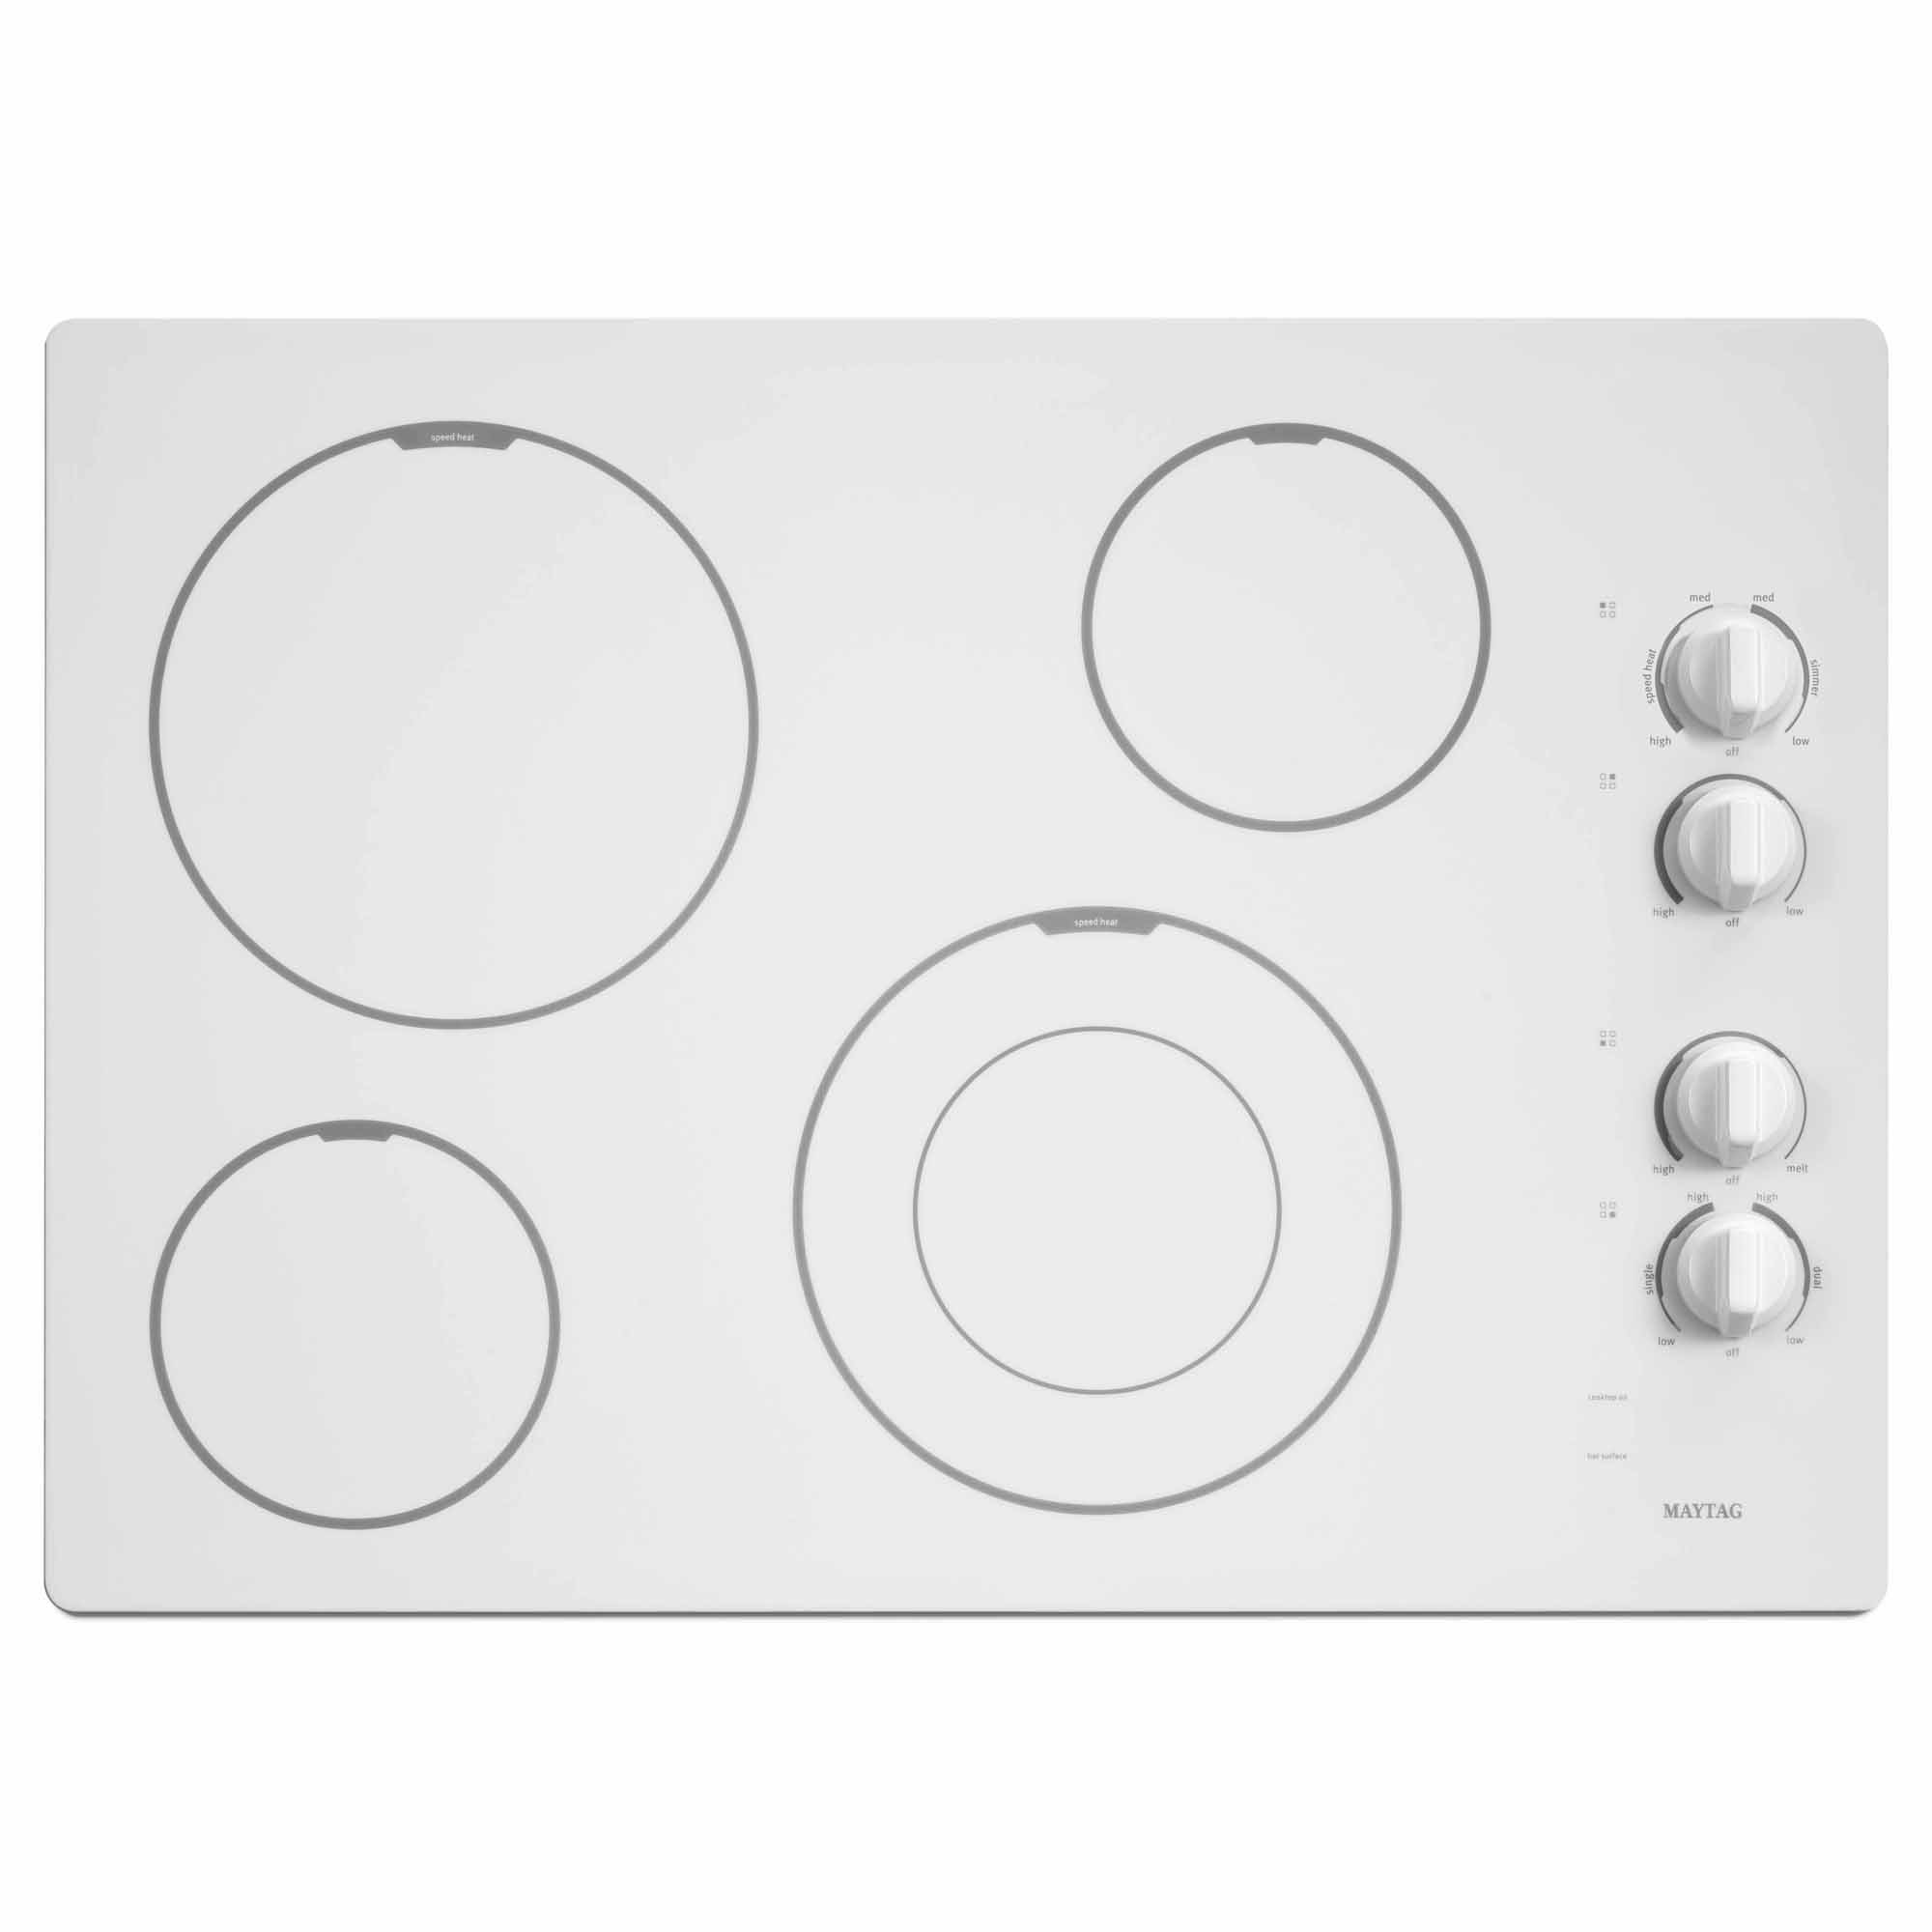 Maytag 30 Electric Glass Cooktop w\/ Dual-Choice Element - White - MEC7430BW